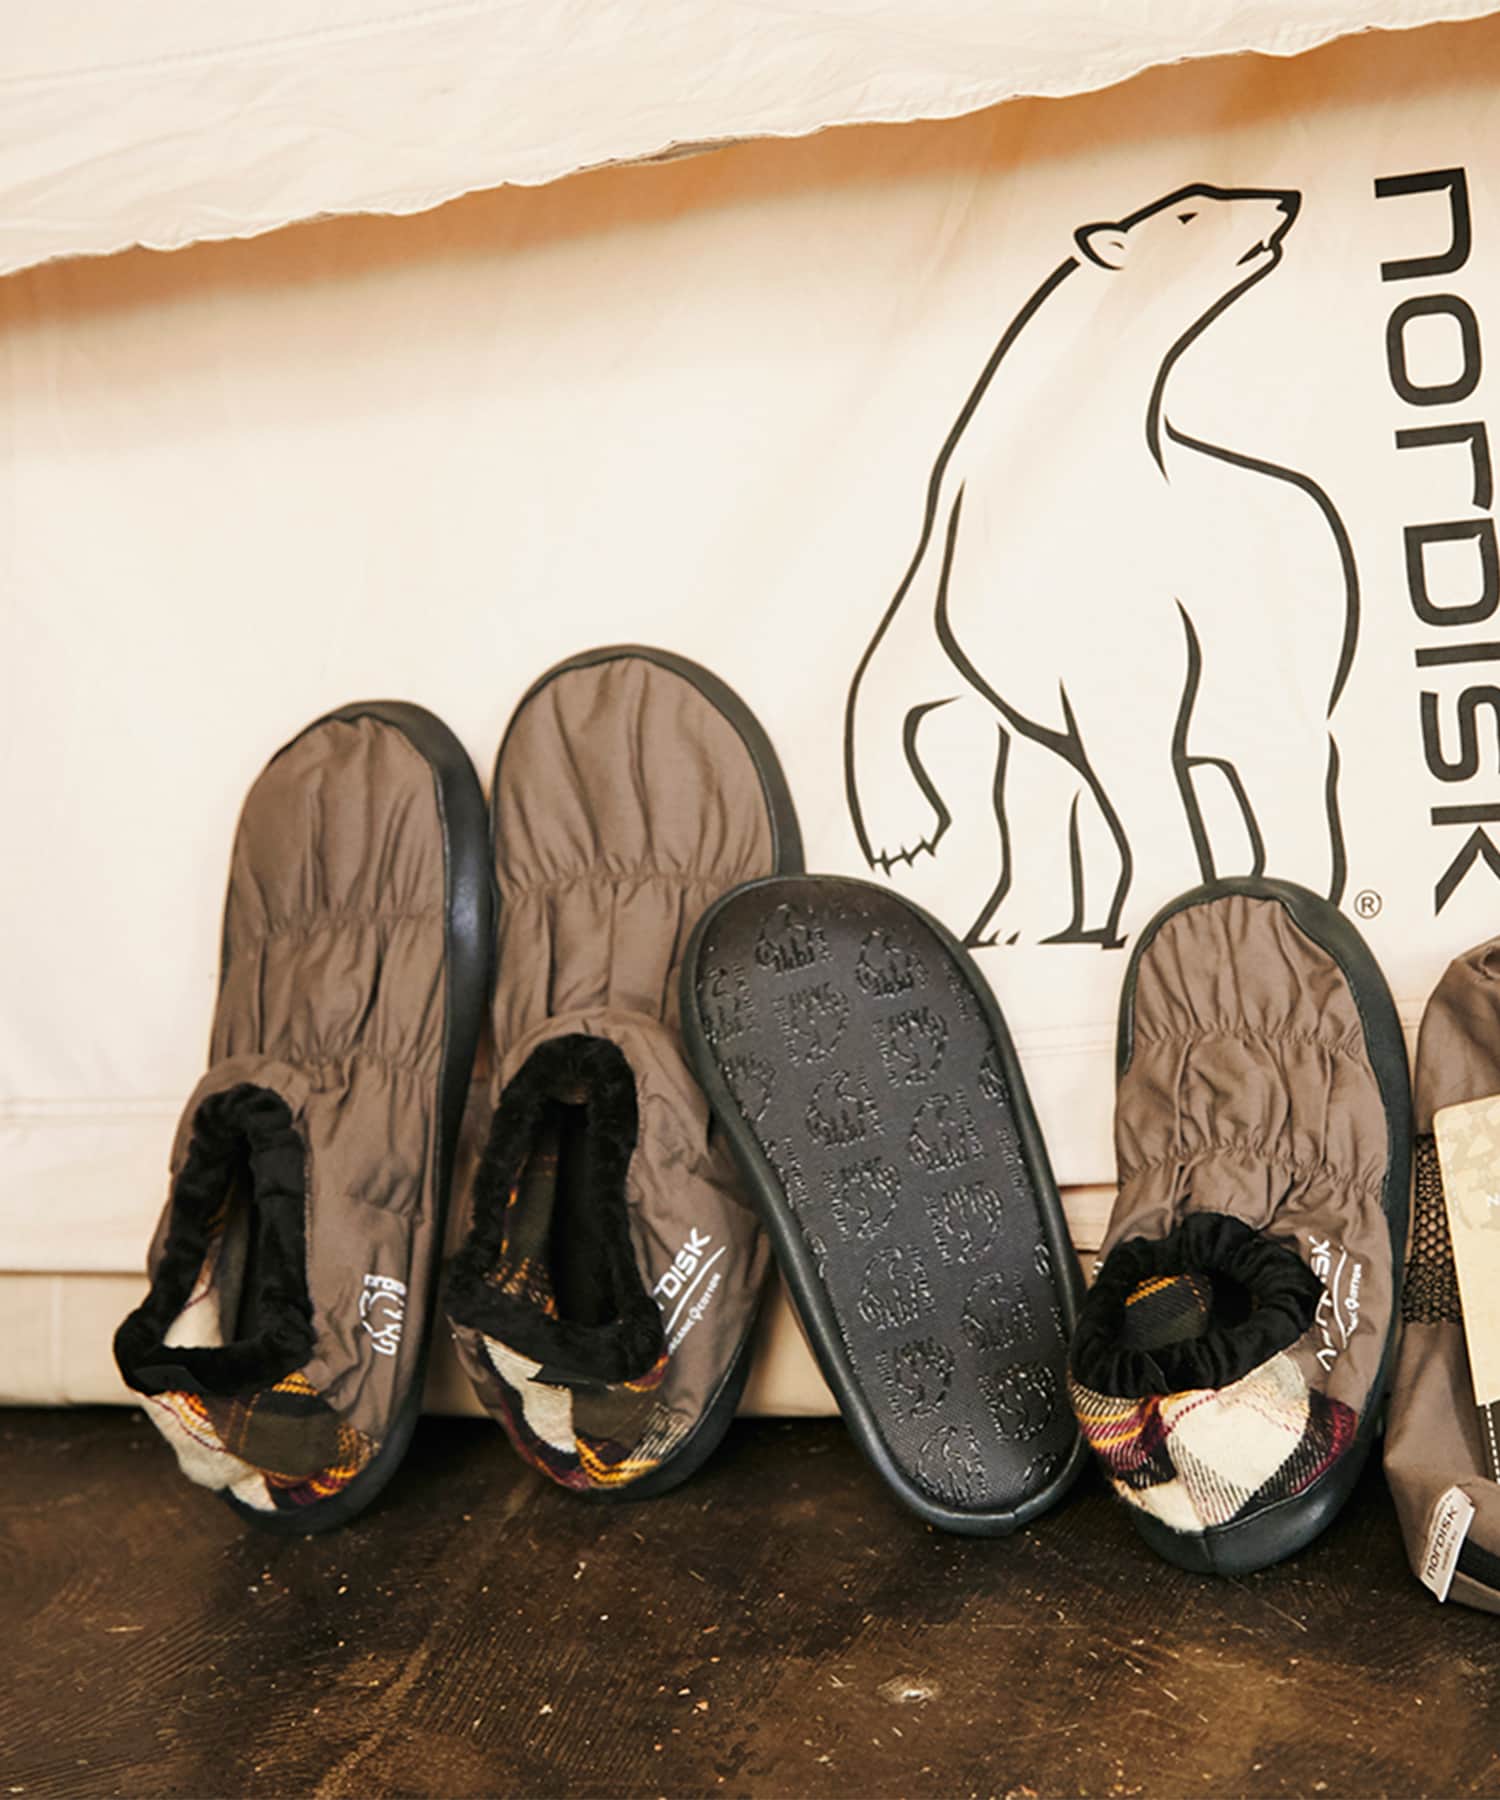 NORDISK HERMOD DOWN SLIPPERS/BUNGY CORD / ノルディスク ヘルモーズ 